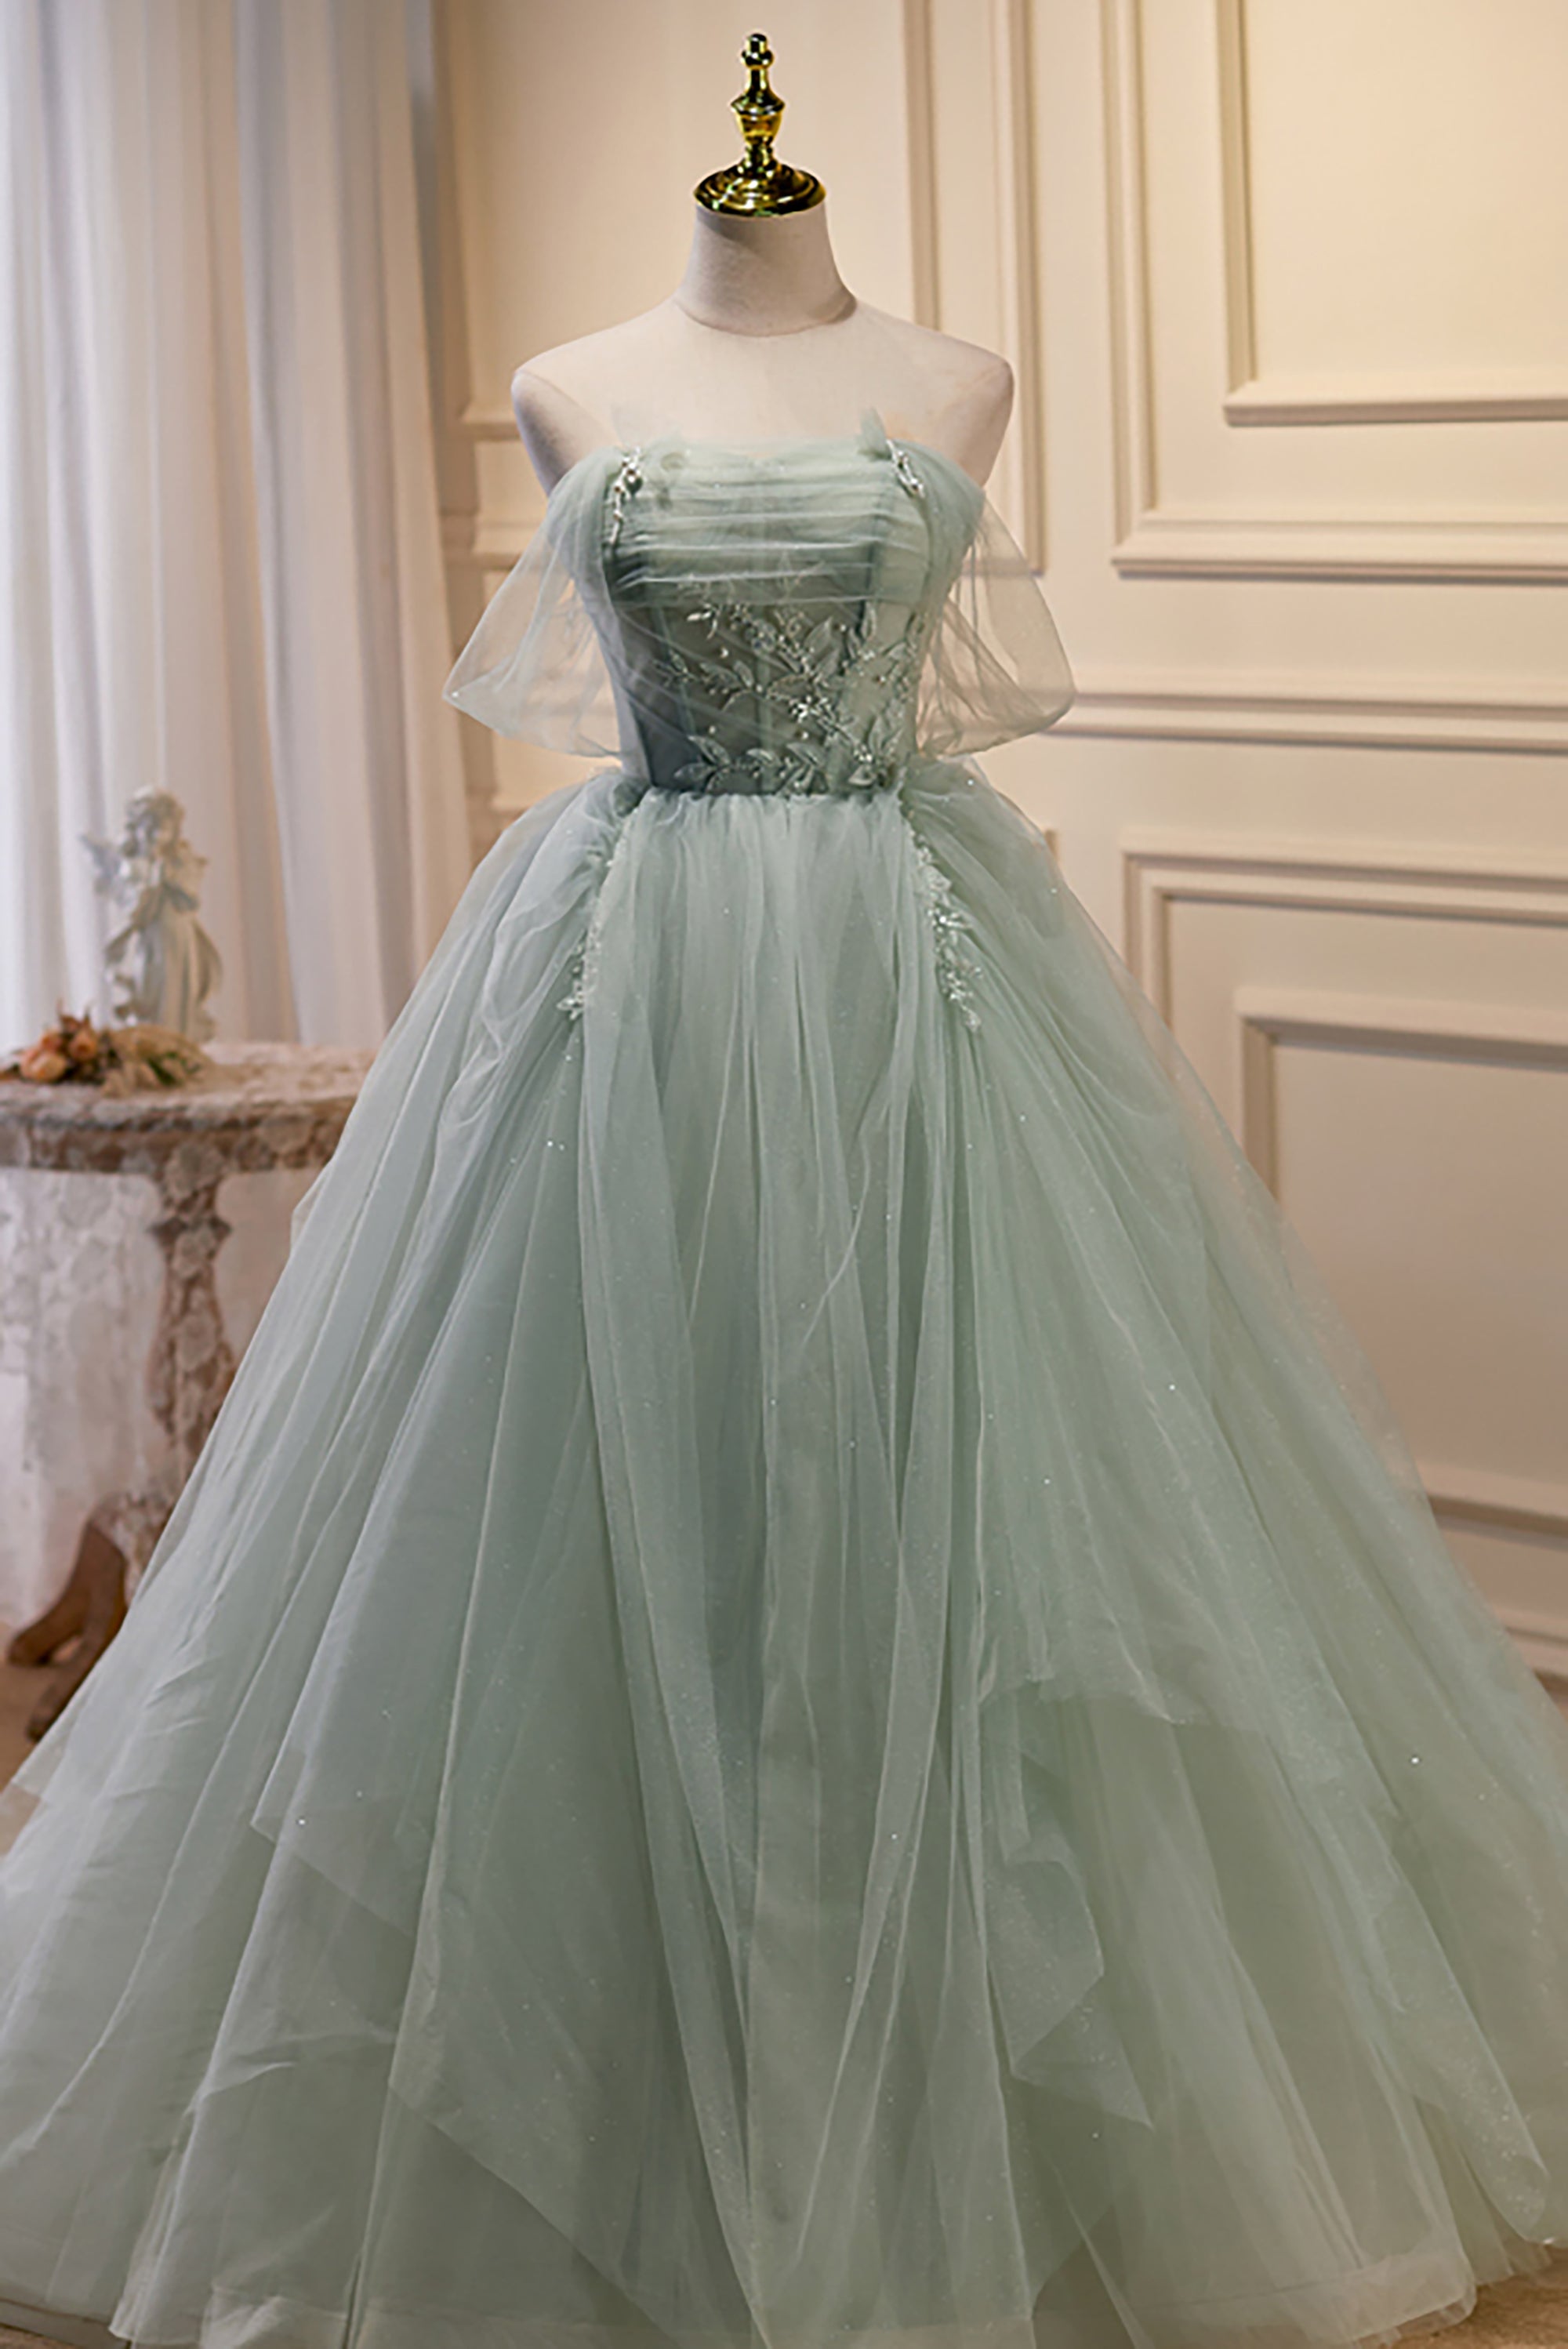 Elegant Green Strapless Evening Gown Off The Shoulder Tulle Prom Dresses